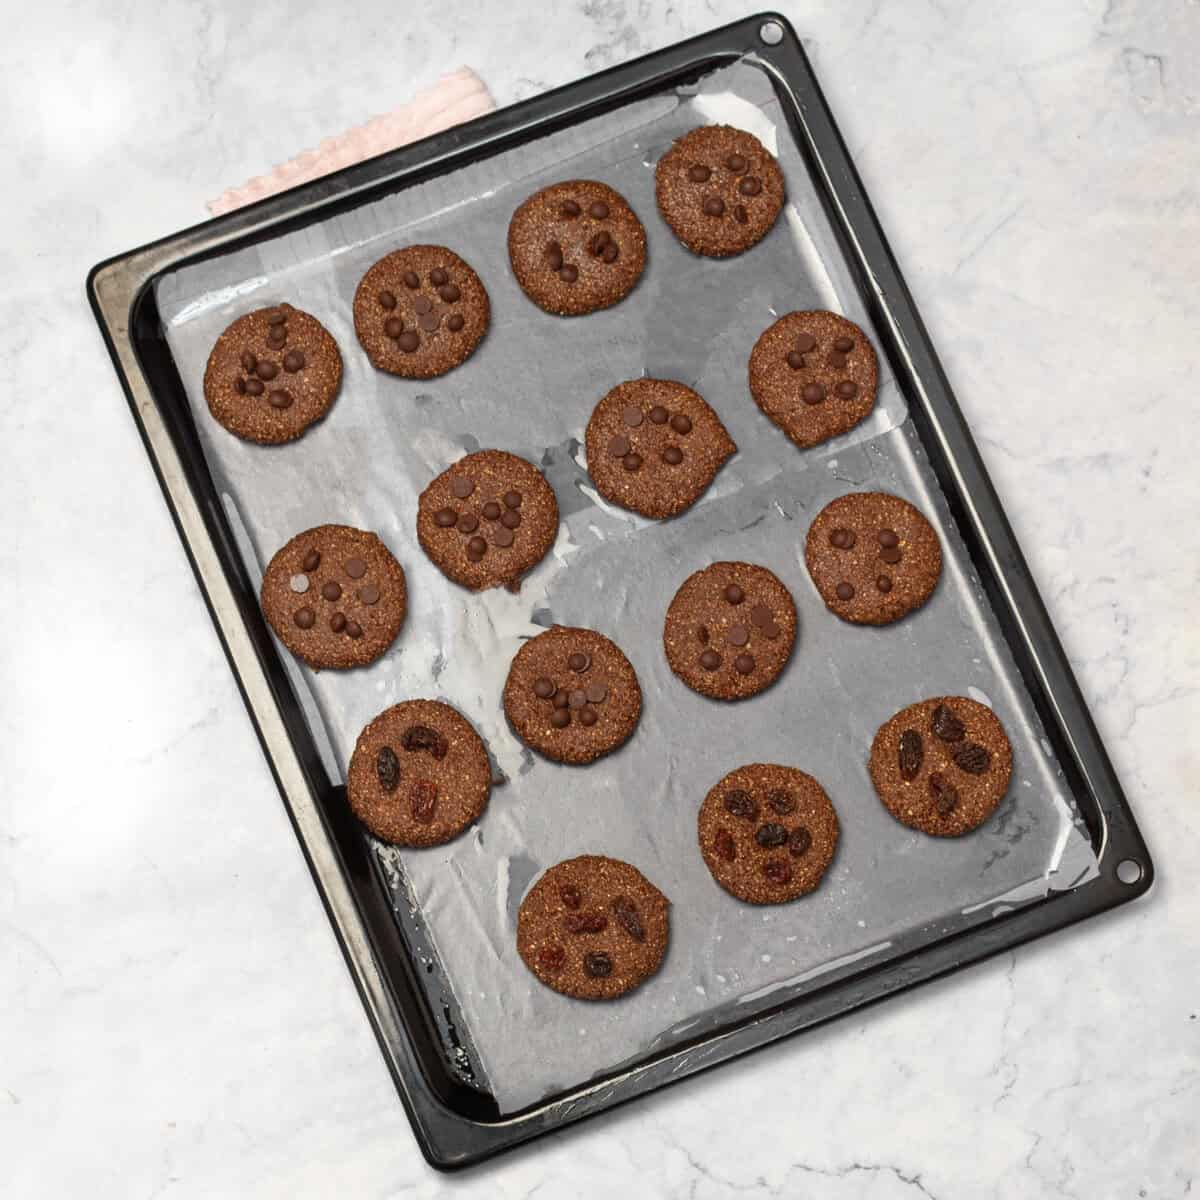 Chocolate Cookies arranged in backing tray